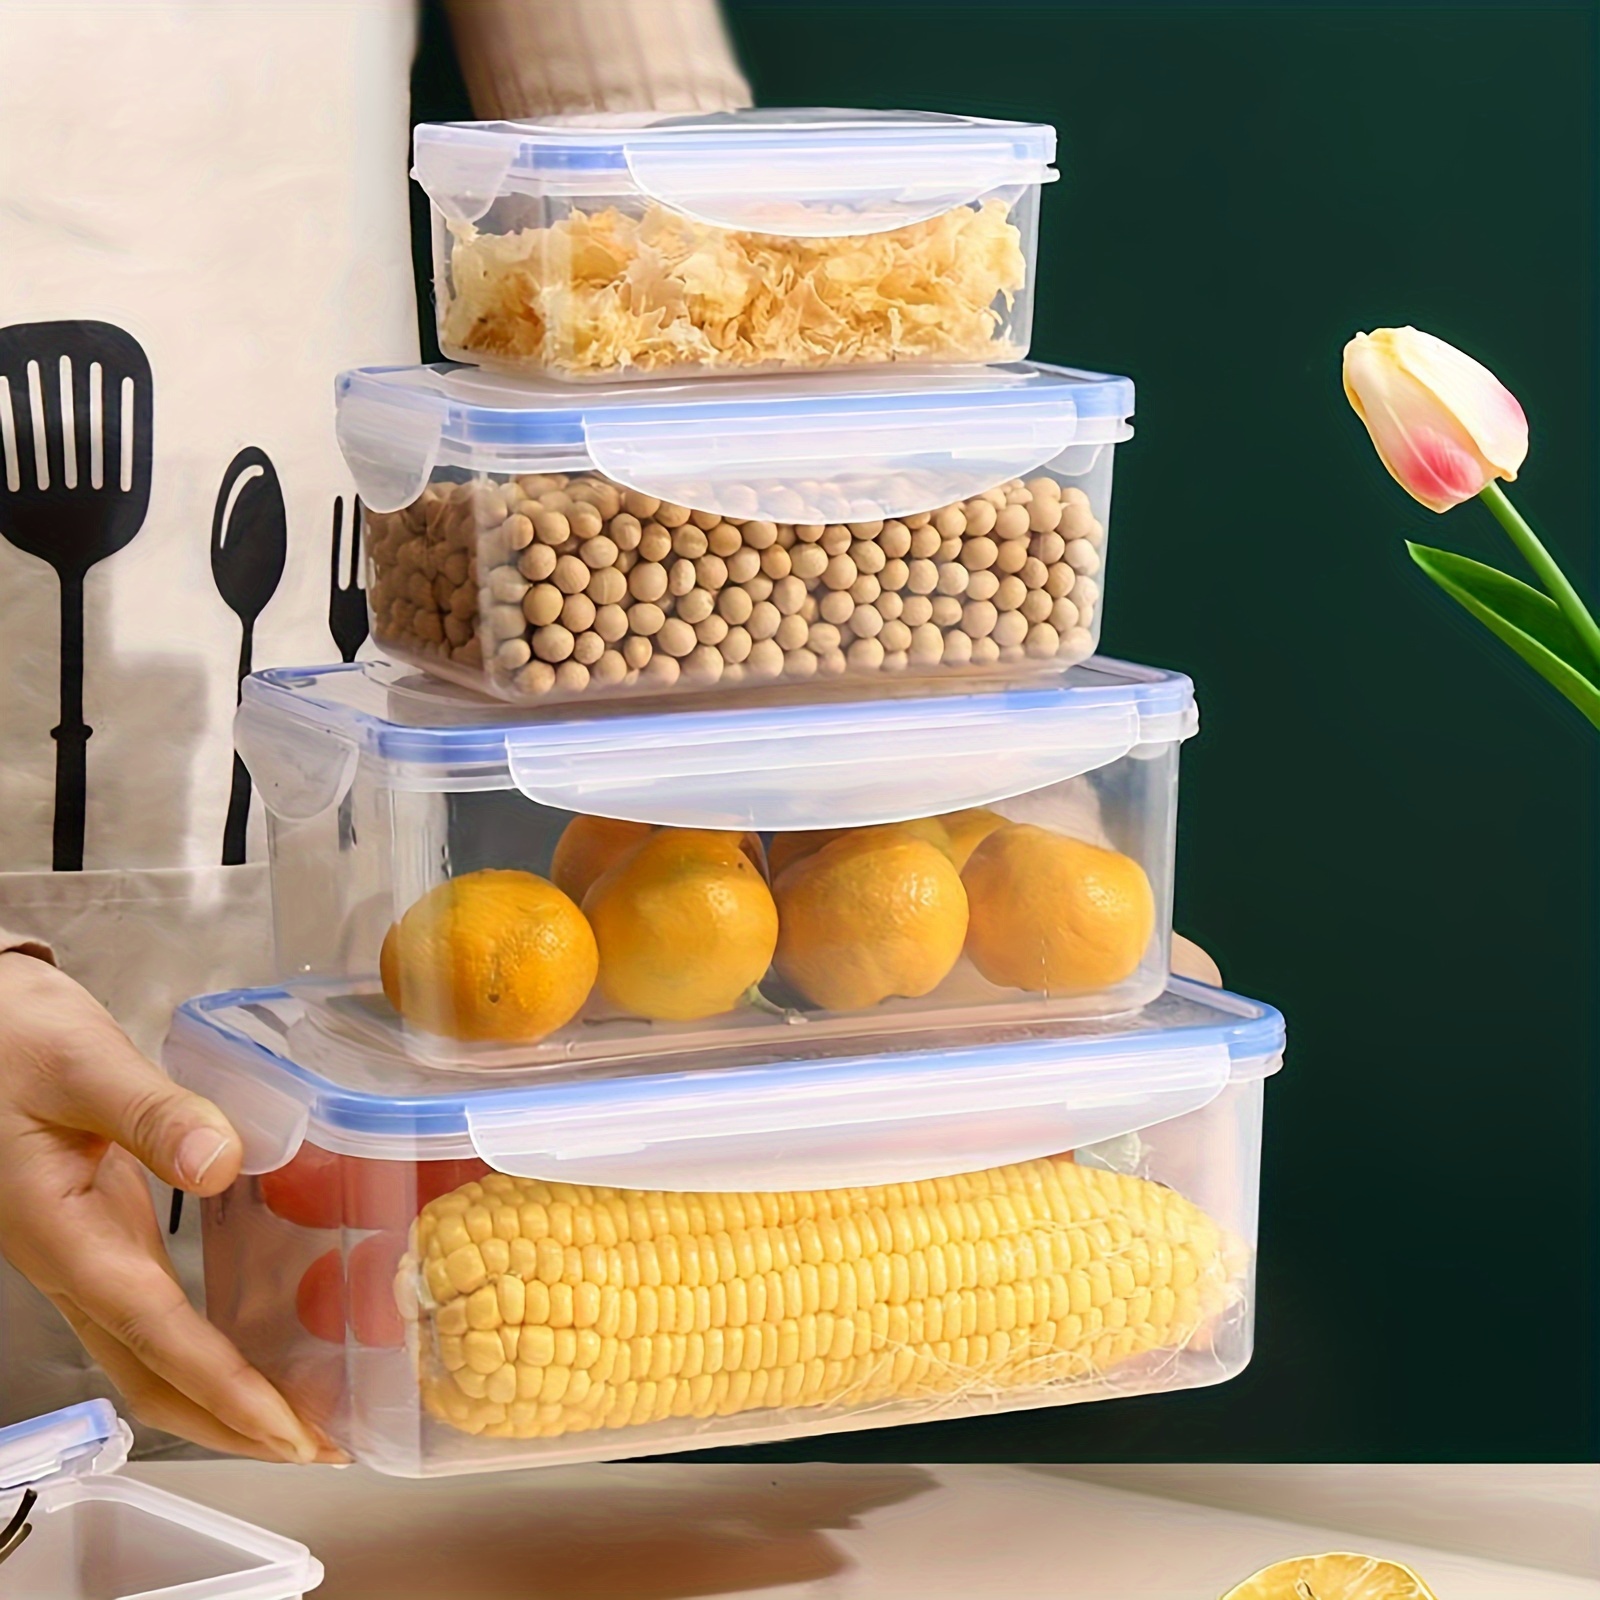 Jlong Refrigerator Storage Box Can Be Stacked with Lid Sealed Food Crisper Box Can Be Refrigerated Microwave Oven Heated Grain Storage Box Large